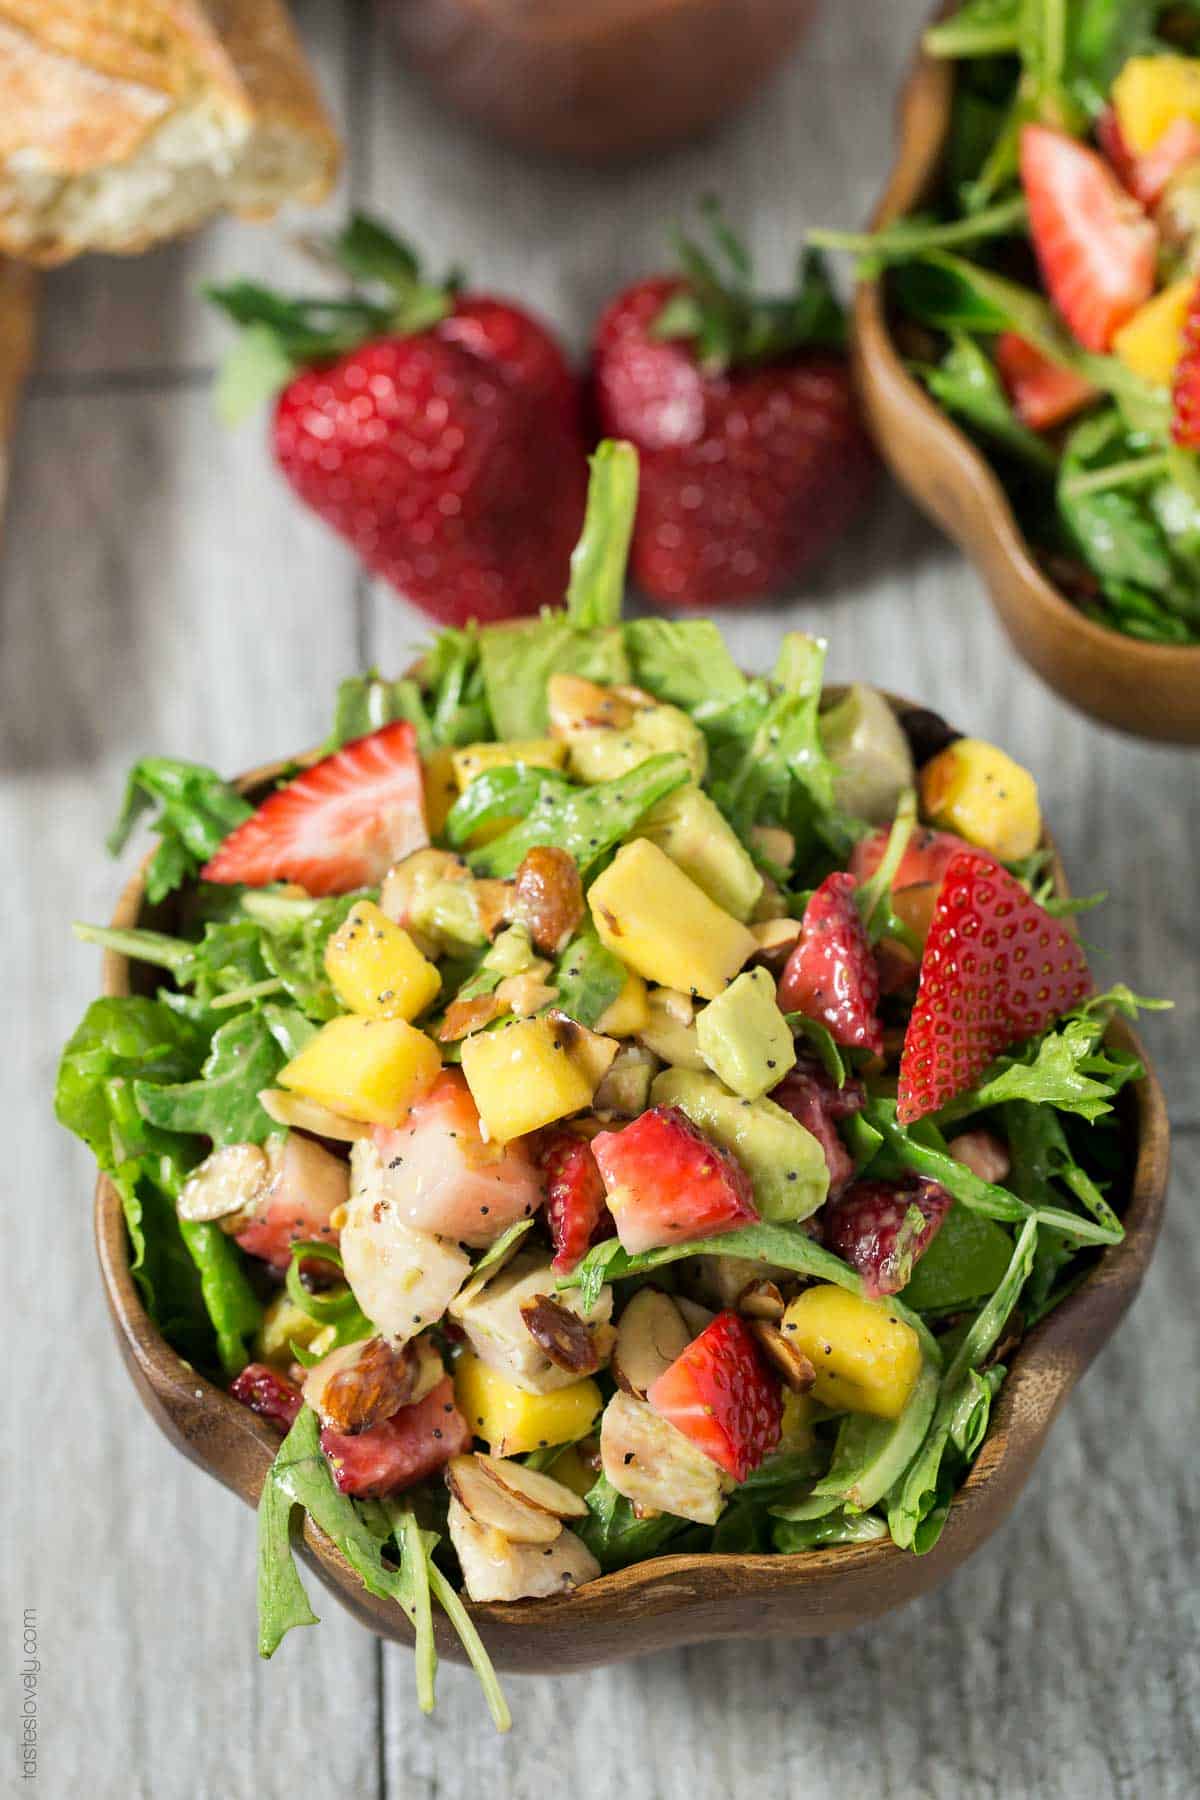 Paleo Strawberry Mango Salad with Chicken - a healthy and delicious paleo, gluten free and dairy free salad for lunch or dinner!